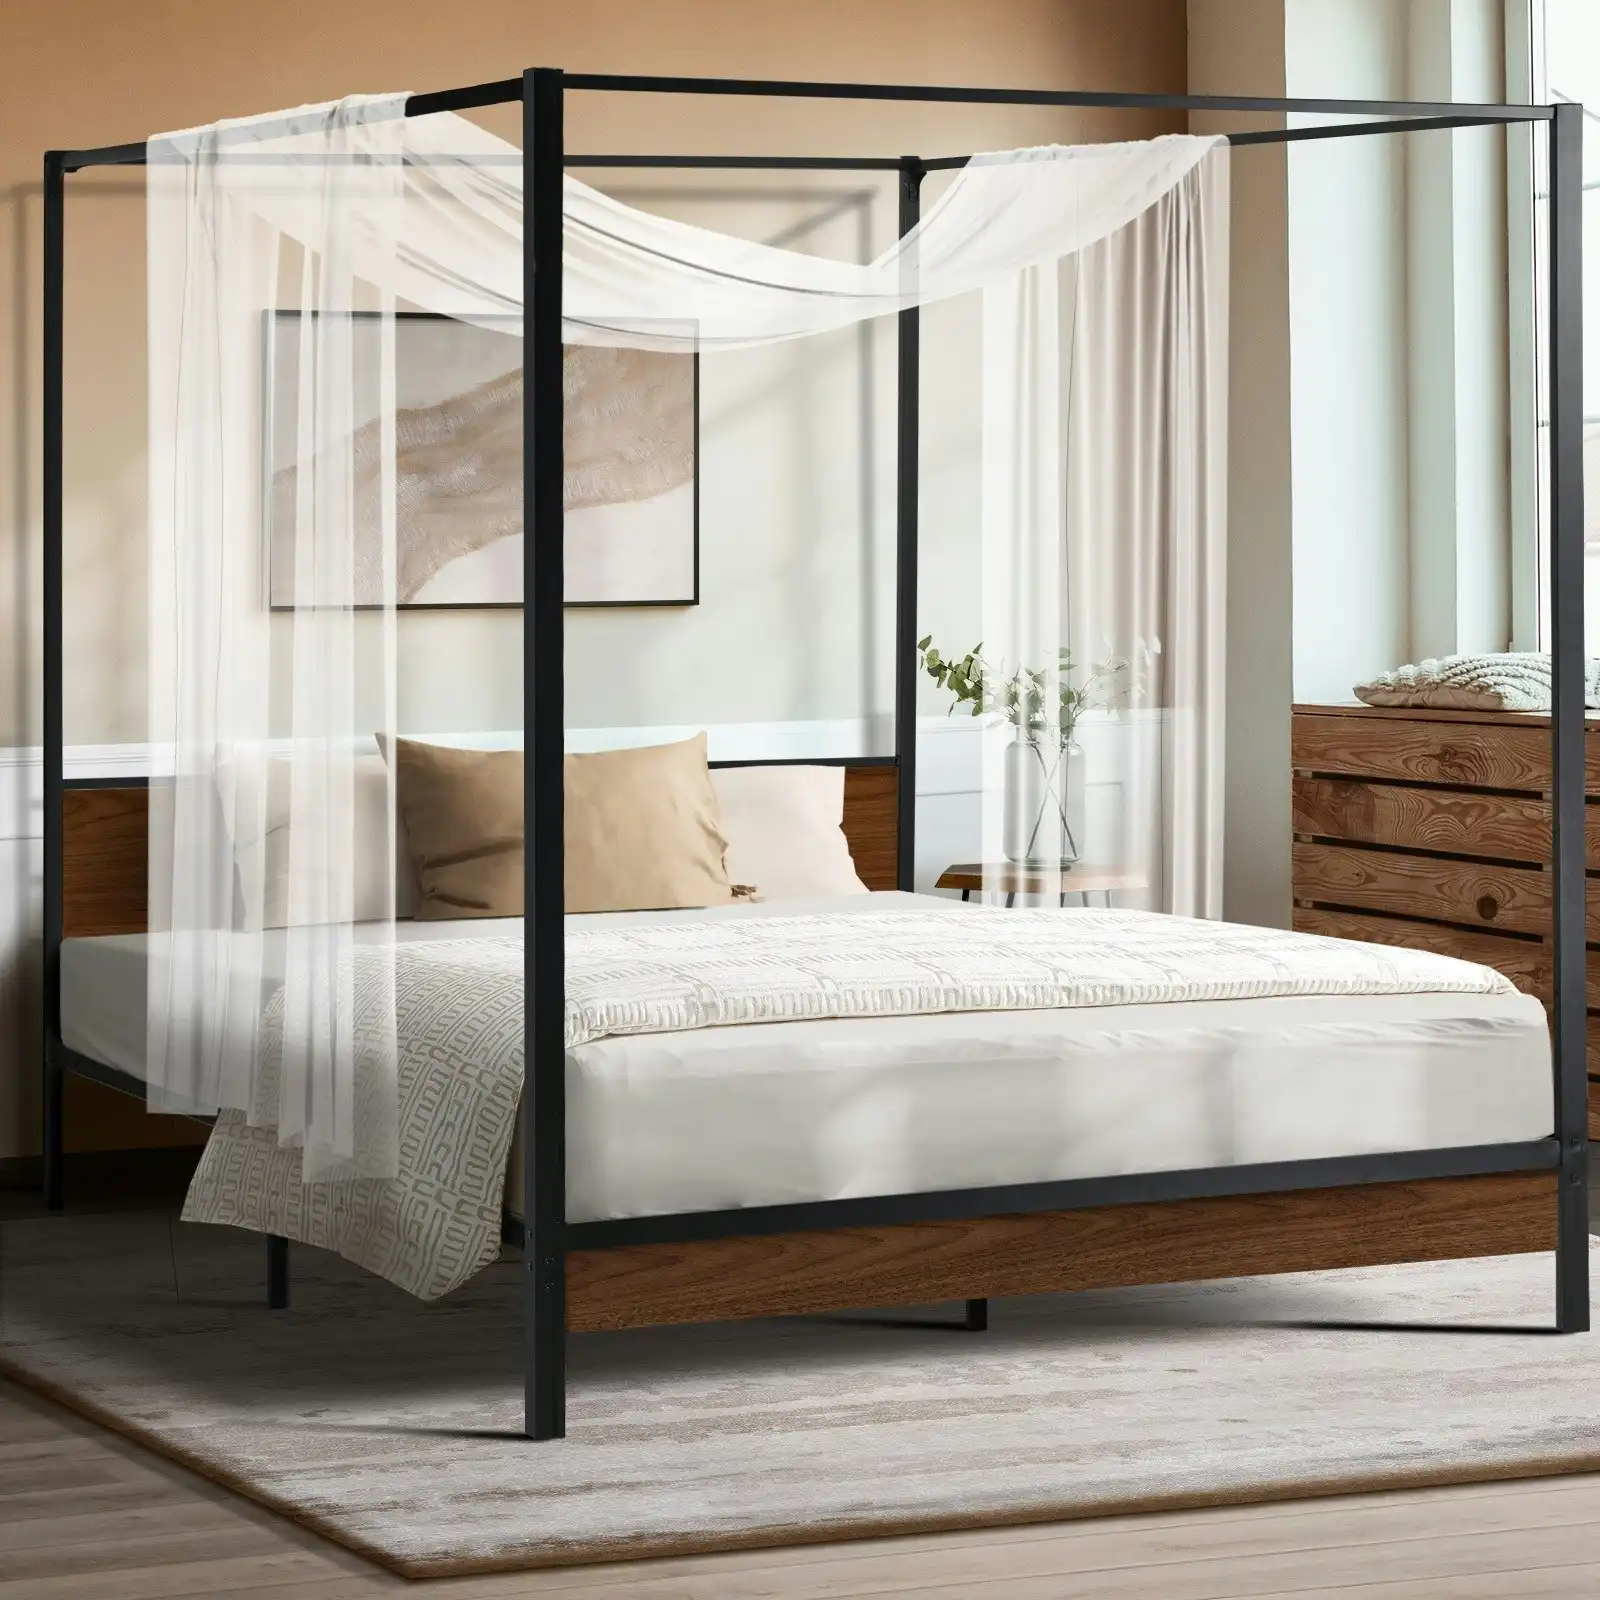 Oikiture Metal Canopy Bed Frame Double Size Beds Platform